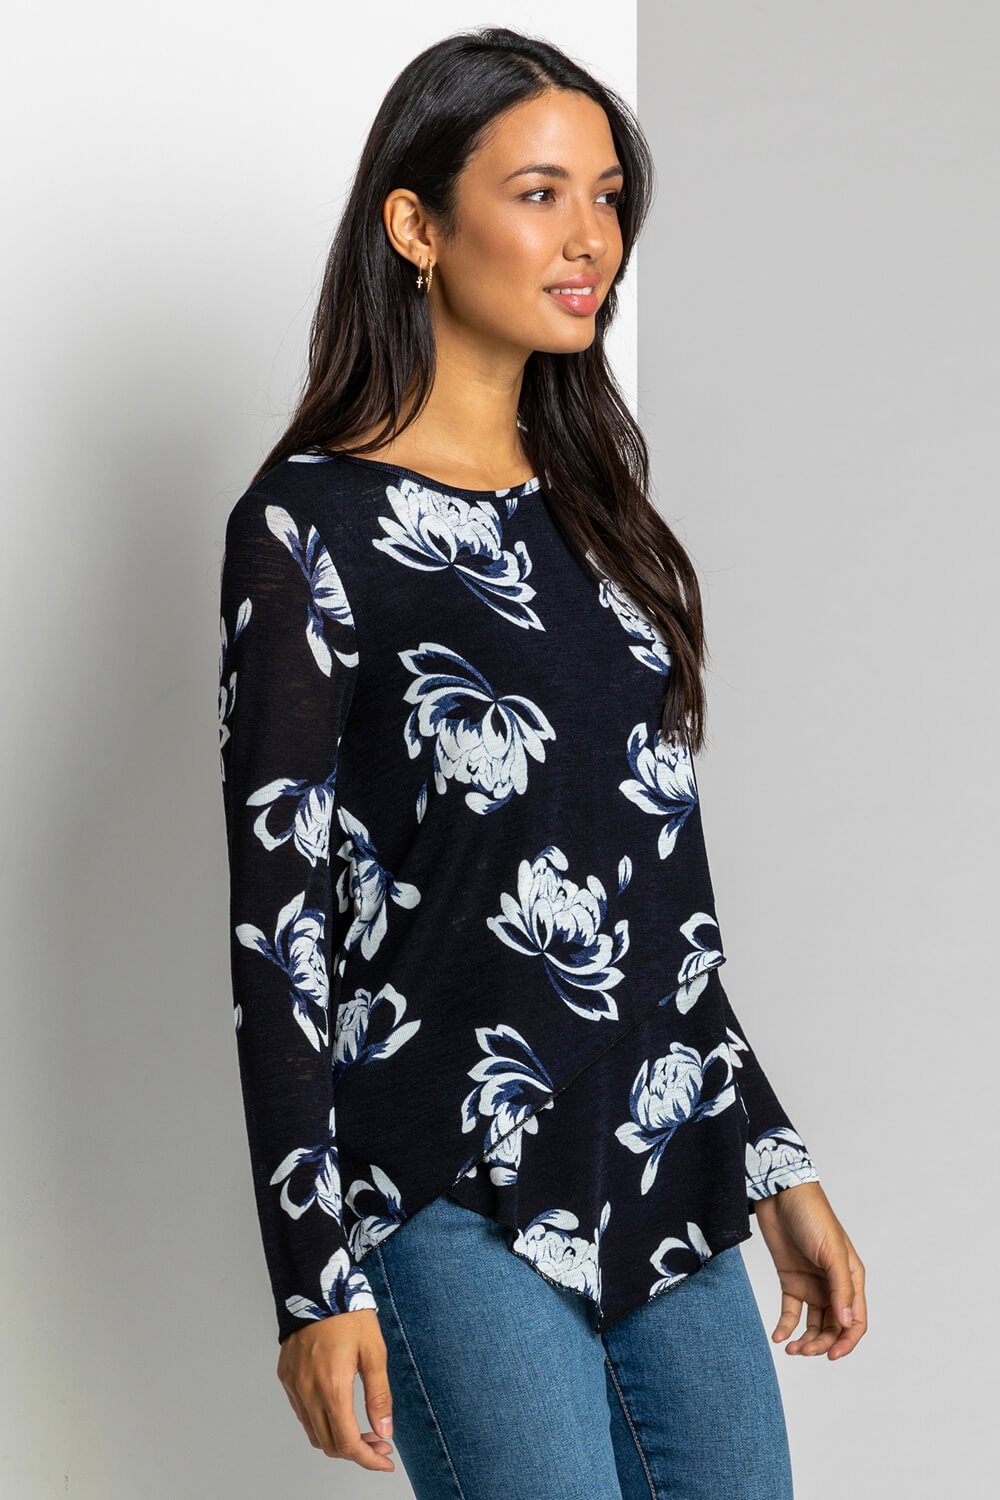 Navy  Floral Print Layered Asymmetric Tunic Top, Image 5 of 5